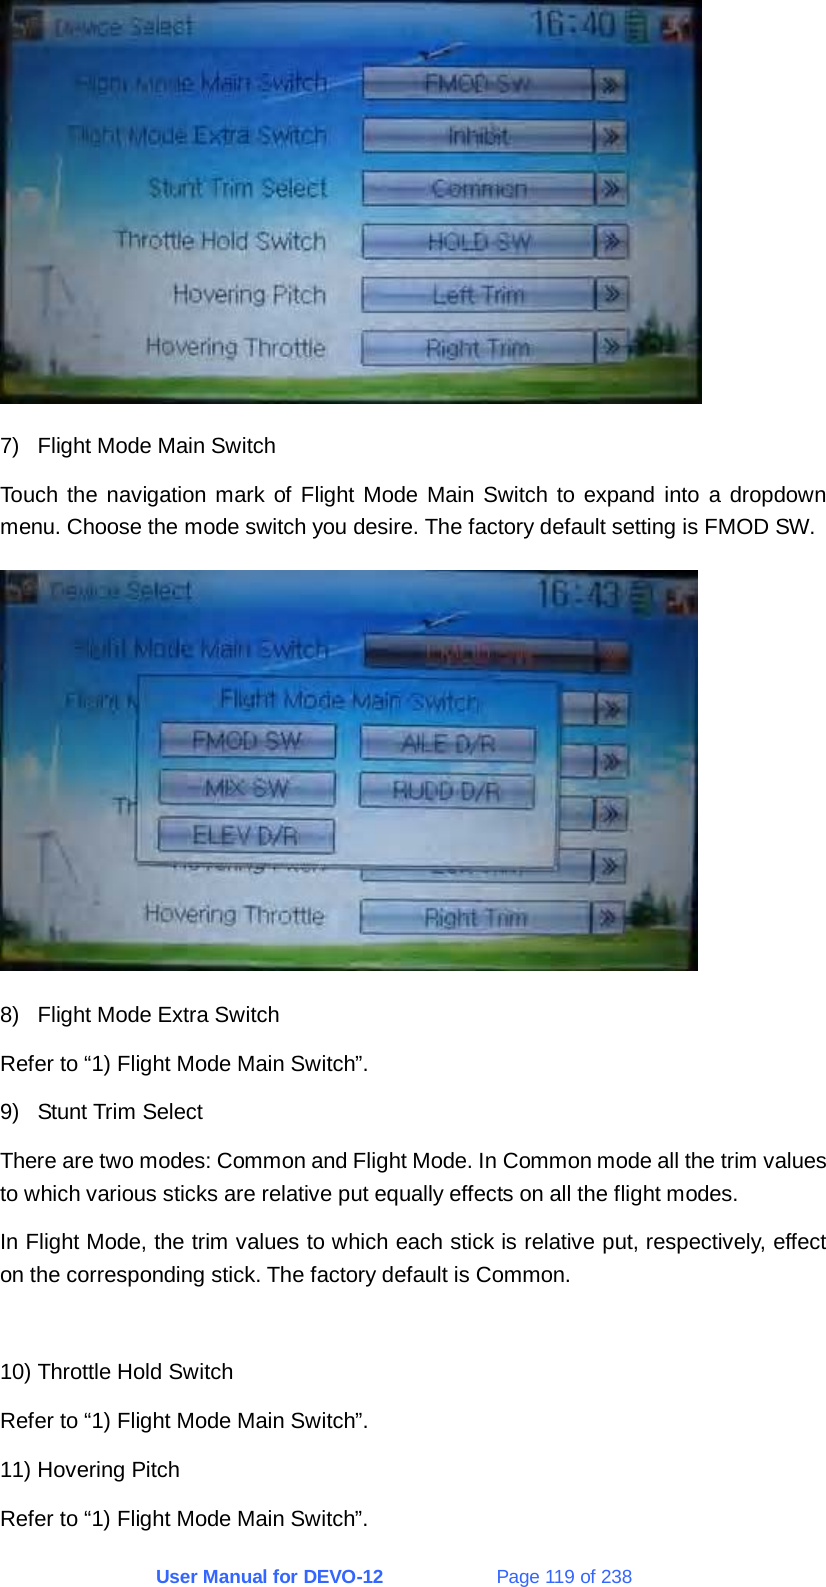 User Manual for DEVO-12             Page 119 of 238  7)  Flight Mode Main Switch Touch the navigation mark of Flight Mode Main Switch to expand into a dropdown menu. Choose the mode switch you desire. The factory default setting is FMOD SW.  8)  Flight Mode Extra Switch Refer to “1) Flight Mode Main Switch”. 9)  Stunt Trim Select There are two modes: Common and Flight Mode. In Common mode all the trim values to which various sticks are relative put equally effects on all the flight modes. In Flight Mode, the trim values to which each stick is relative put, respectively, effect on the corresponding stick. The factory default is Common.  10) Throttle Hold Switch Refer to “1) Flight Mode Main Switch”. 11) Hovering Pitch Refer to “1) Flight Mode Main Switch”. 